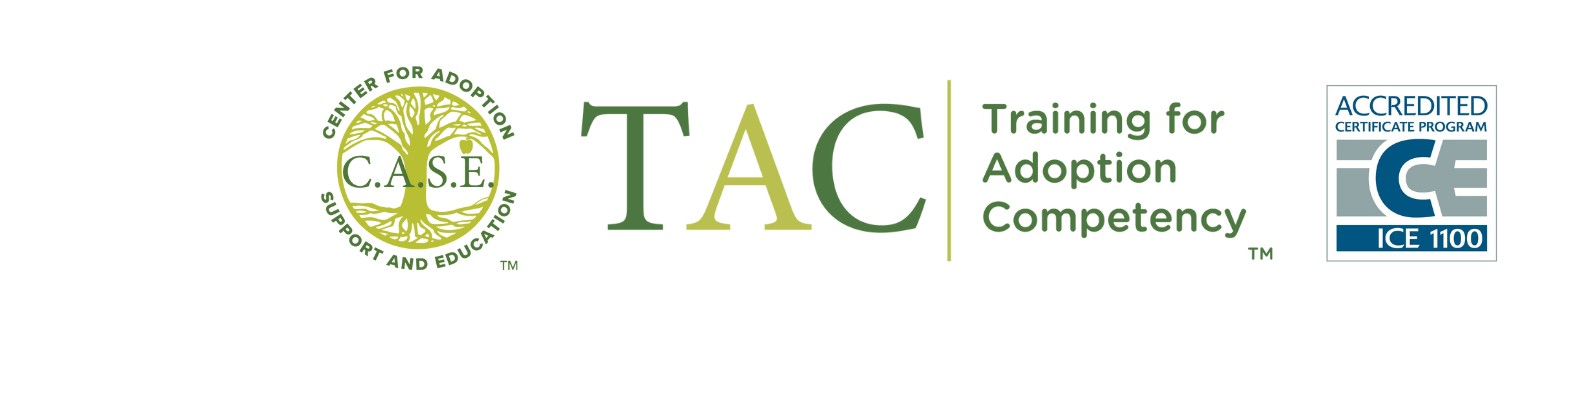 Training for Adoption Competency (TAC) | LinkedIn